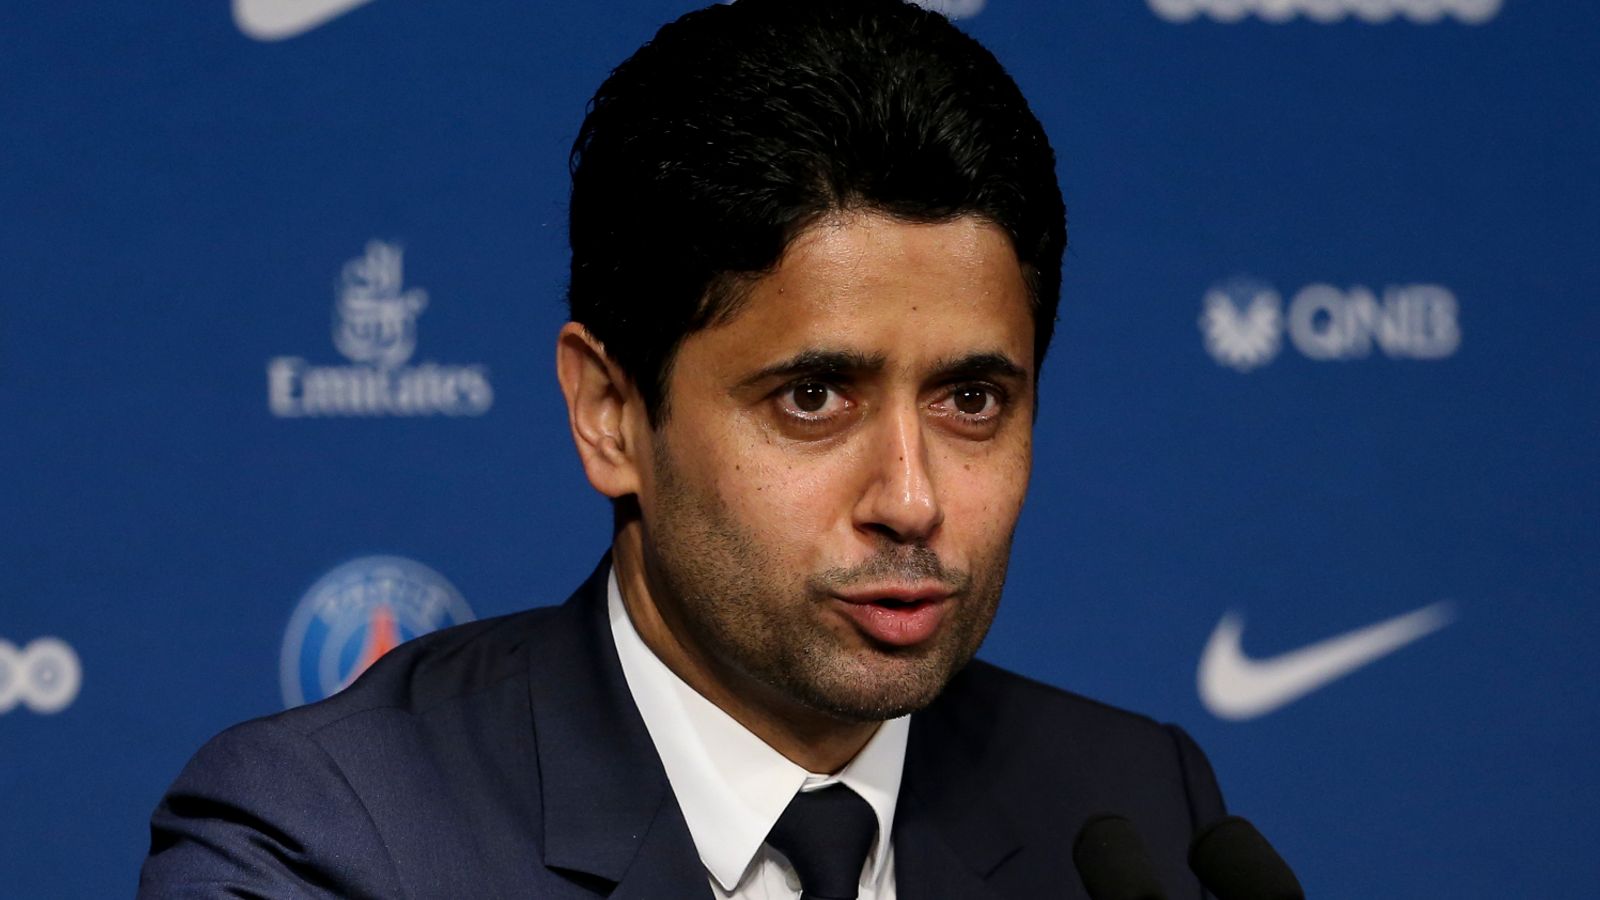 PSG president Nasser Al-Khelaifi charged in relation to corruption ...